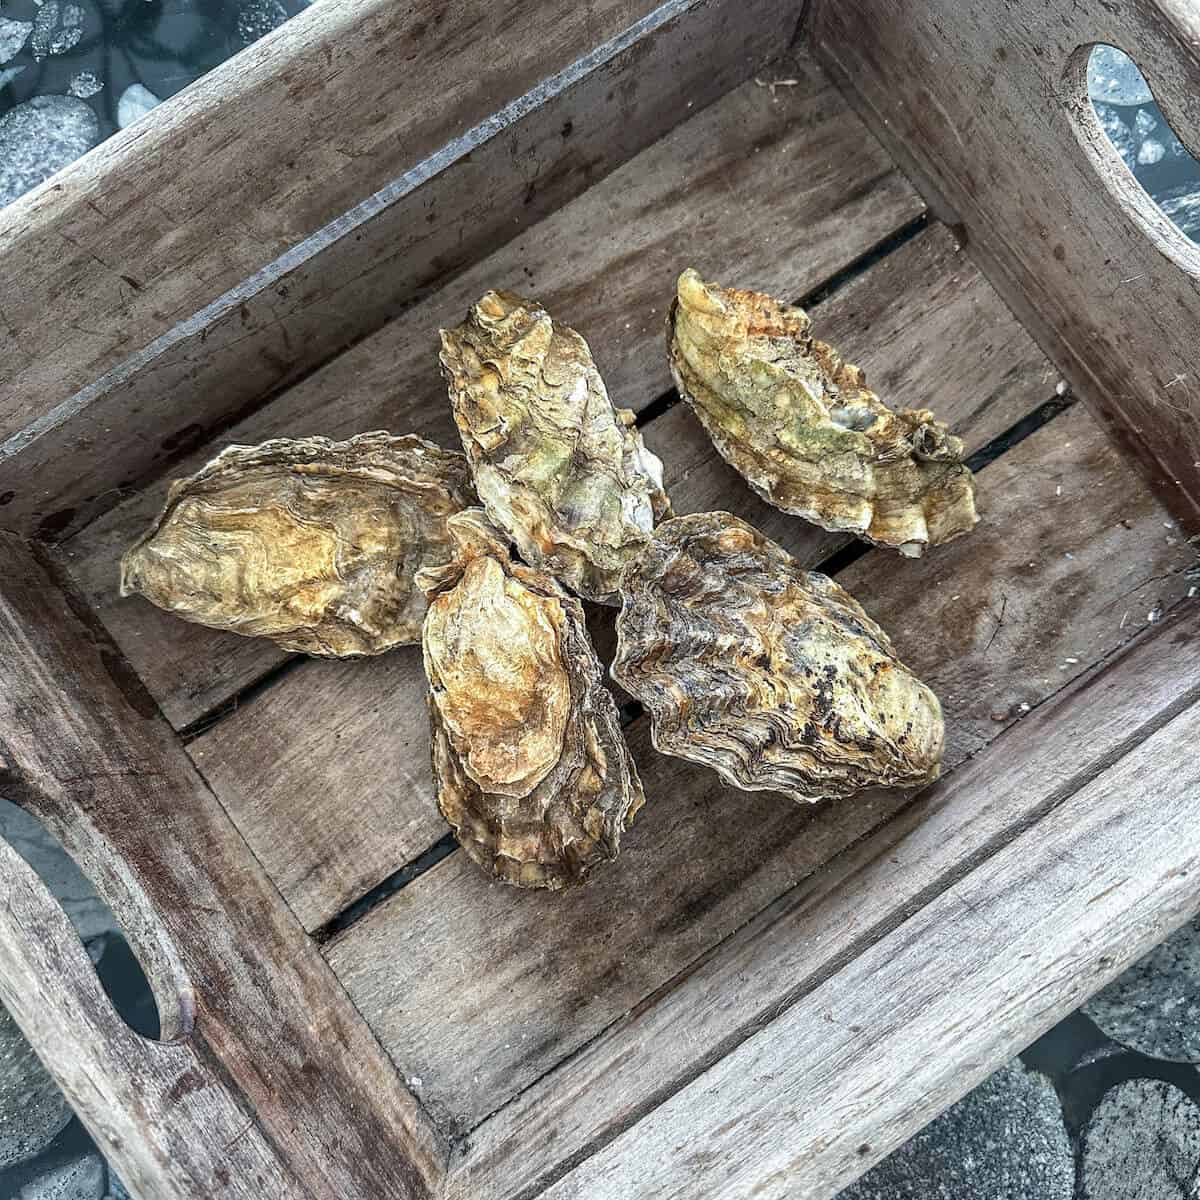 Fresh oysters in a wooden crate.